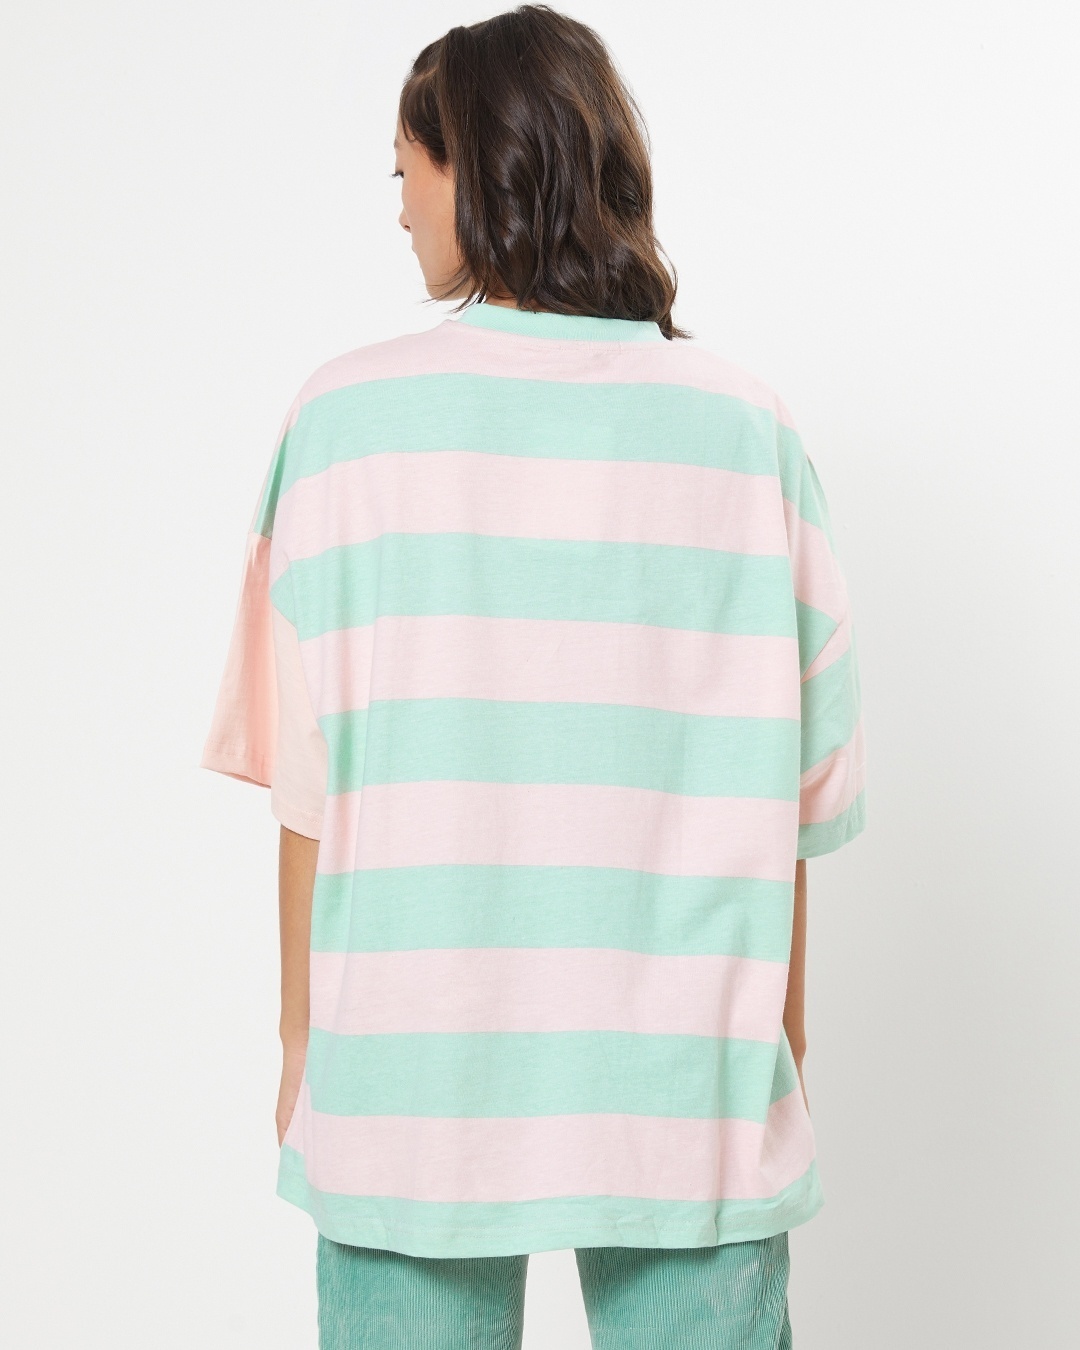 Shop Unisex Sun-Kissed Green and Pink Stripe T-shirt